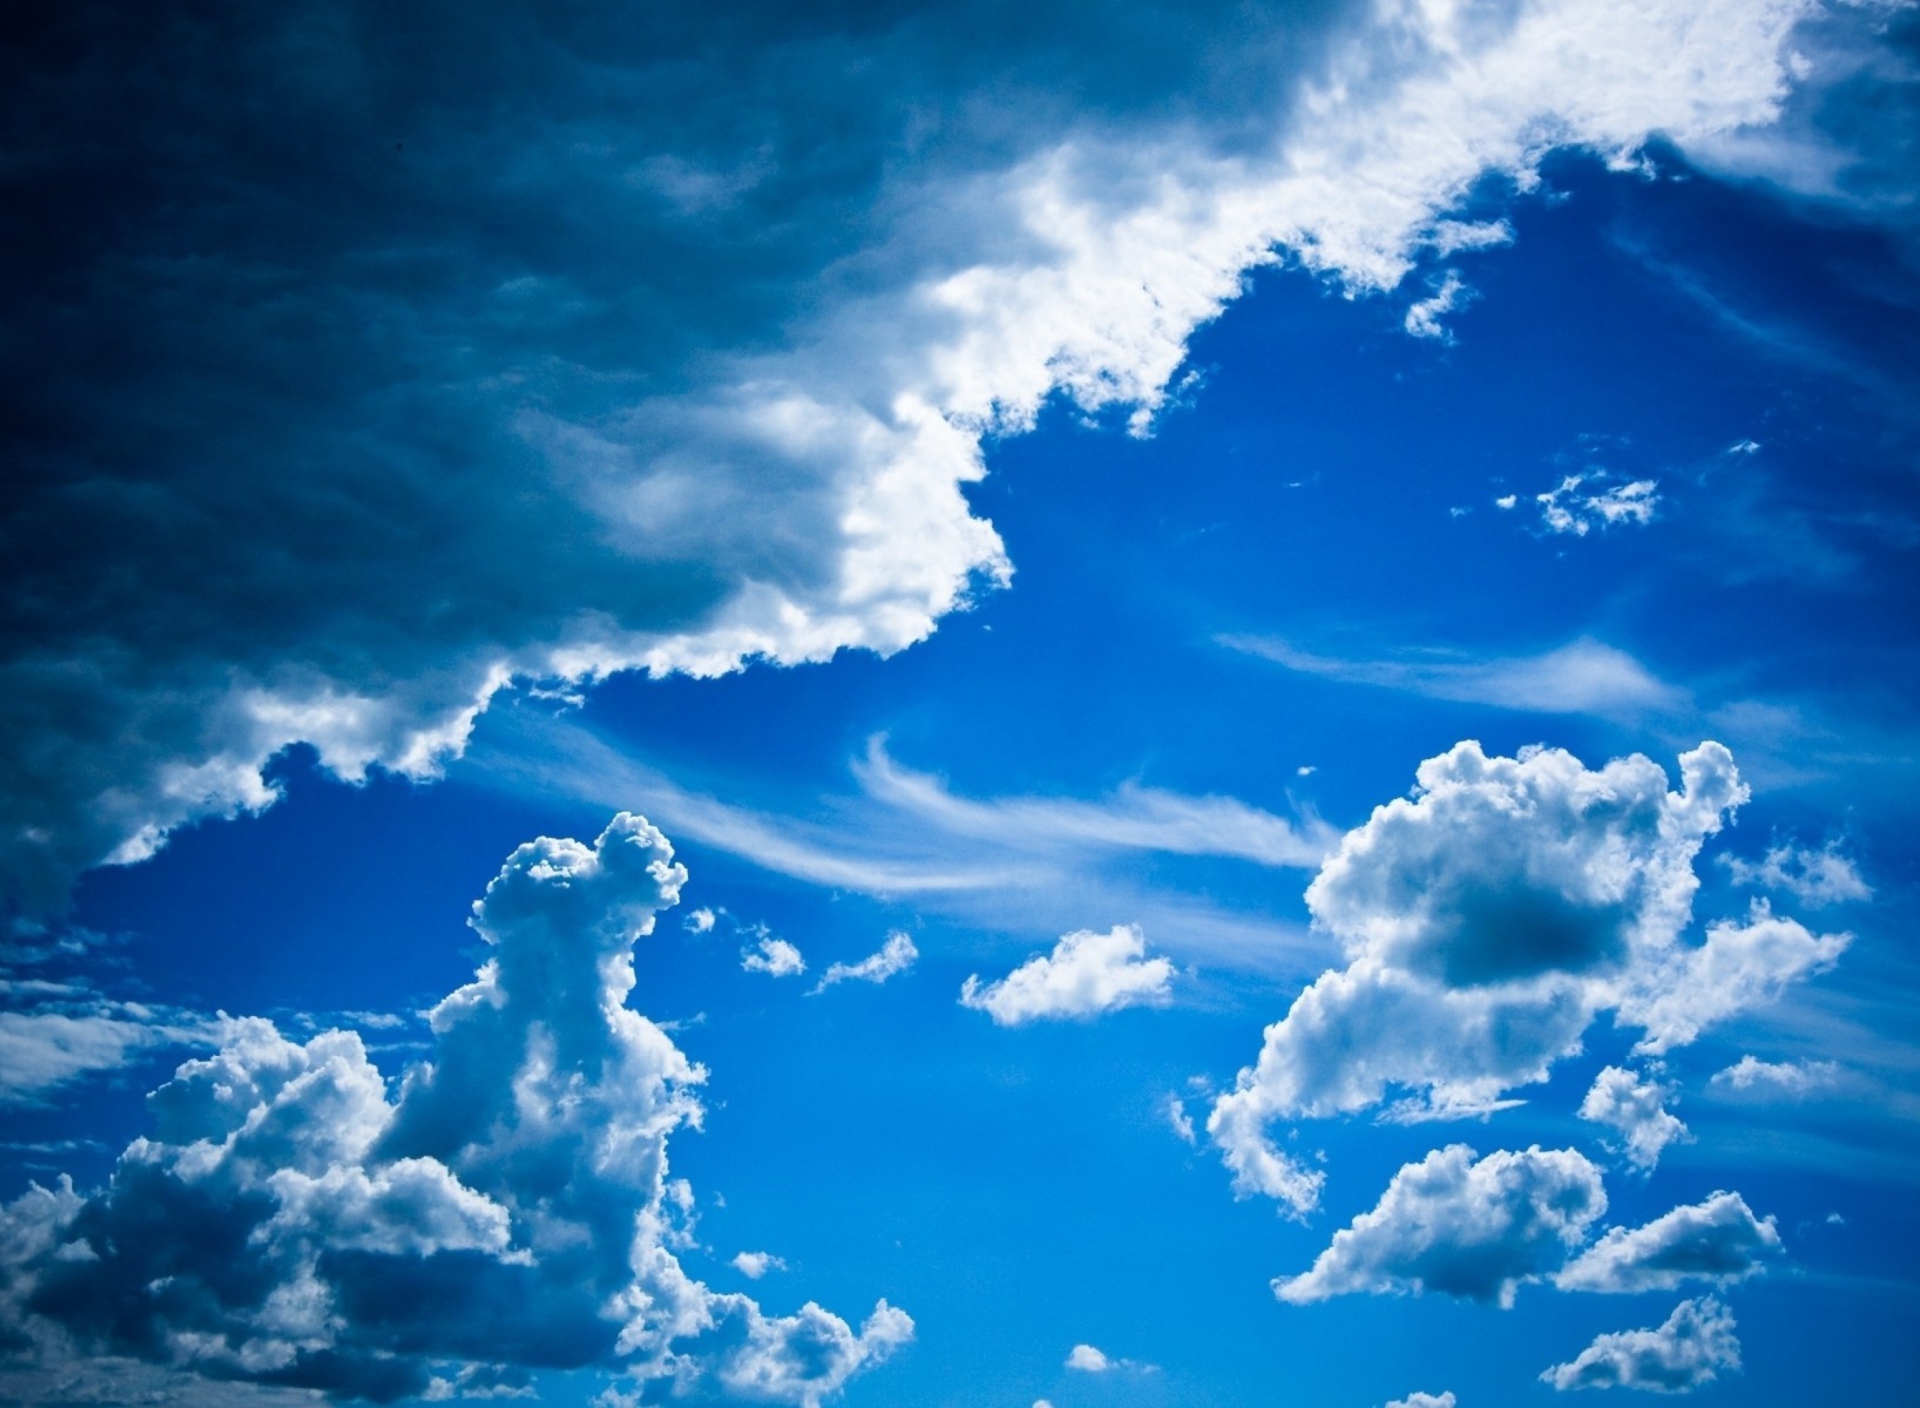 Blue Sky And Clouds wallpaper 1920x1408